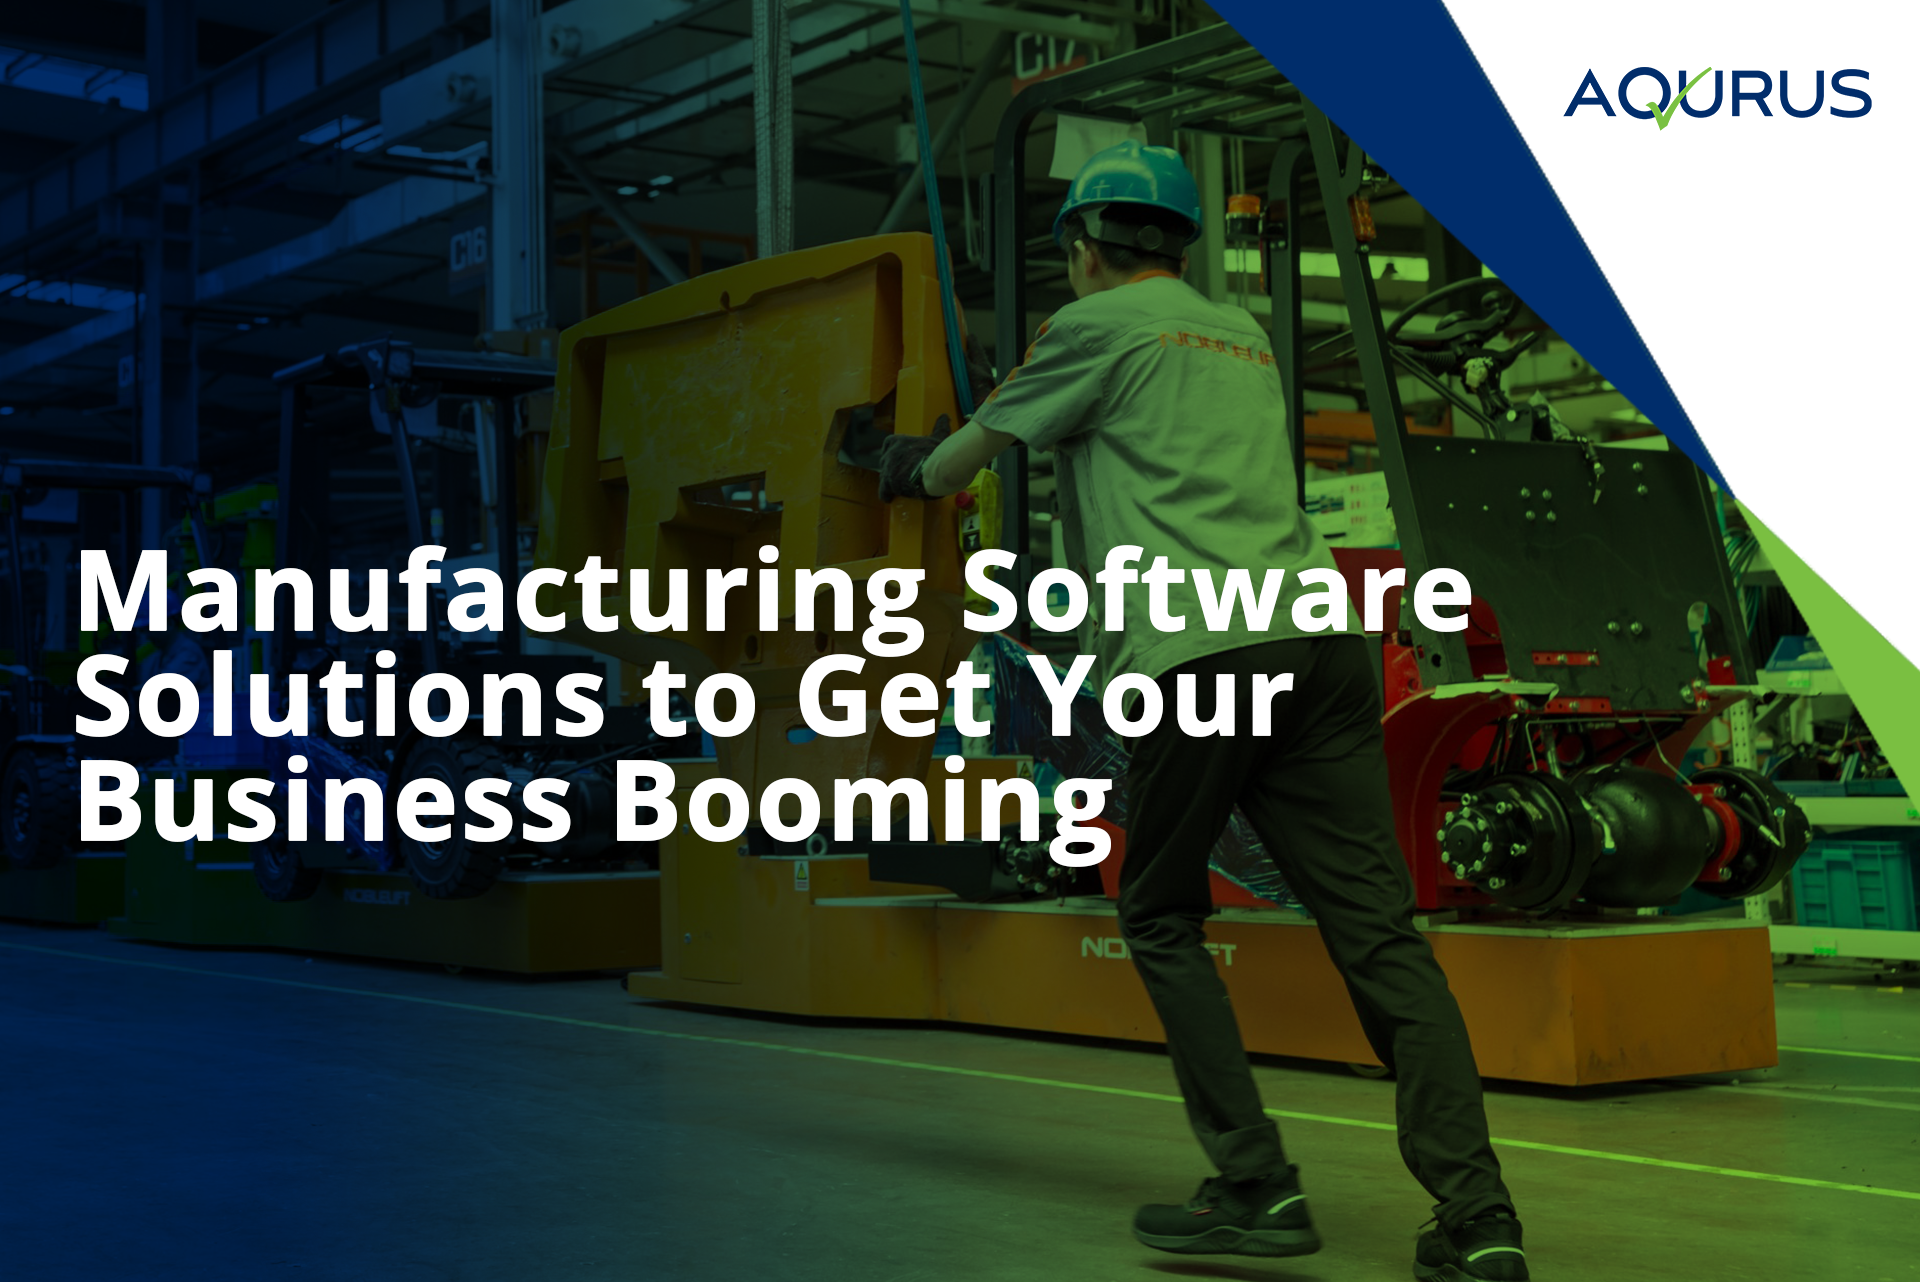 Blog-Manufacturing-Software-Solutions-to-Get-Your-Business-Booming